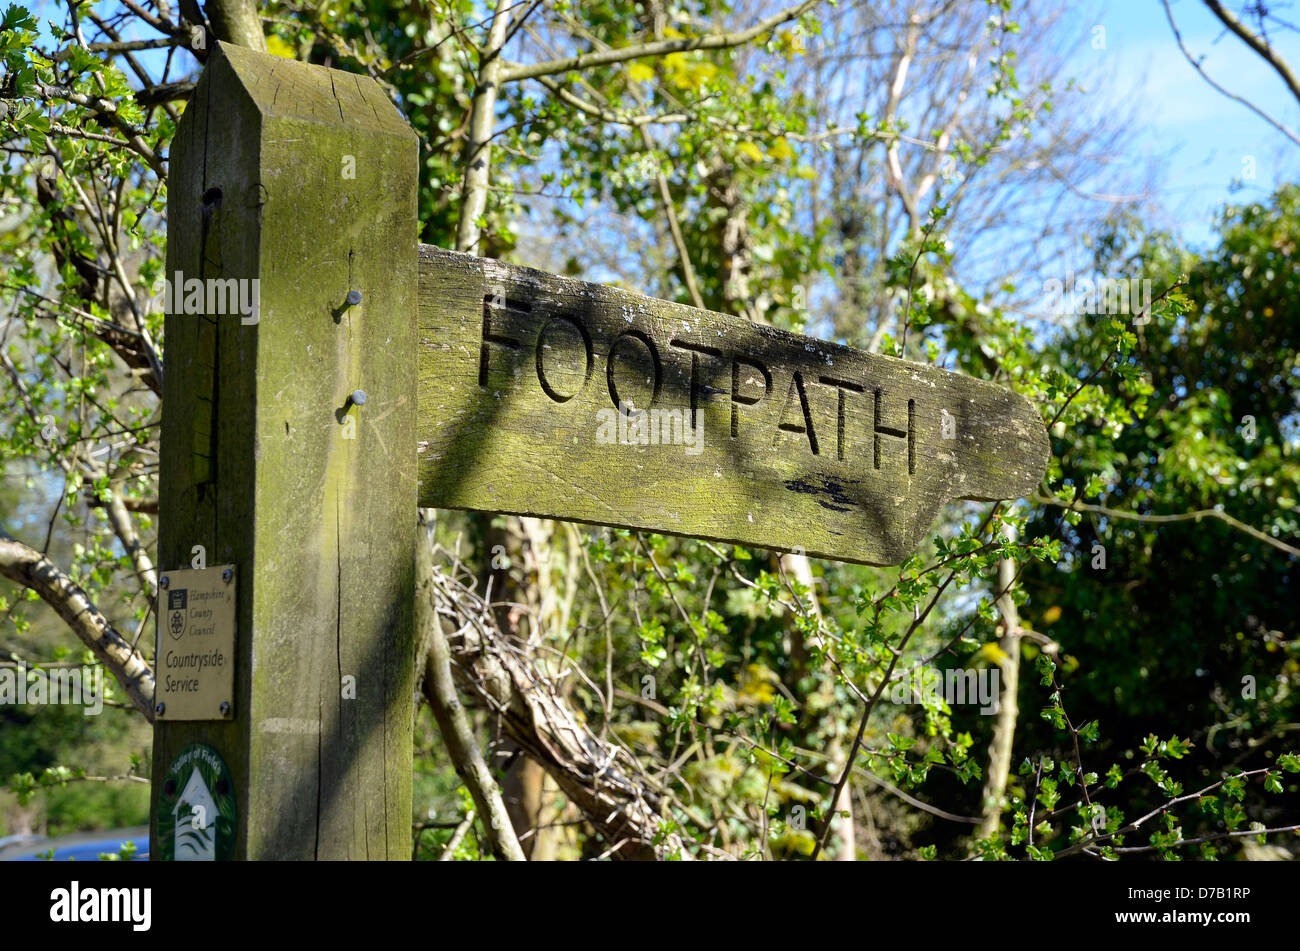 Wooden finger signpost shoing direction of a footpath Stock Photo